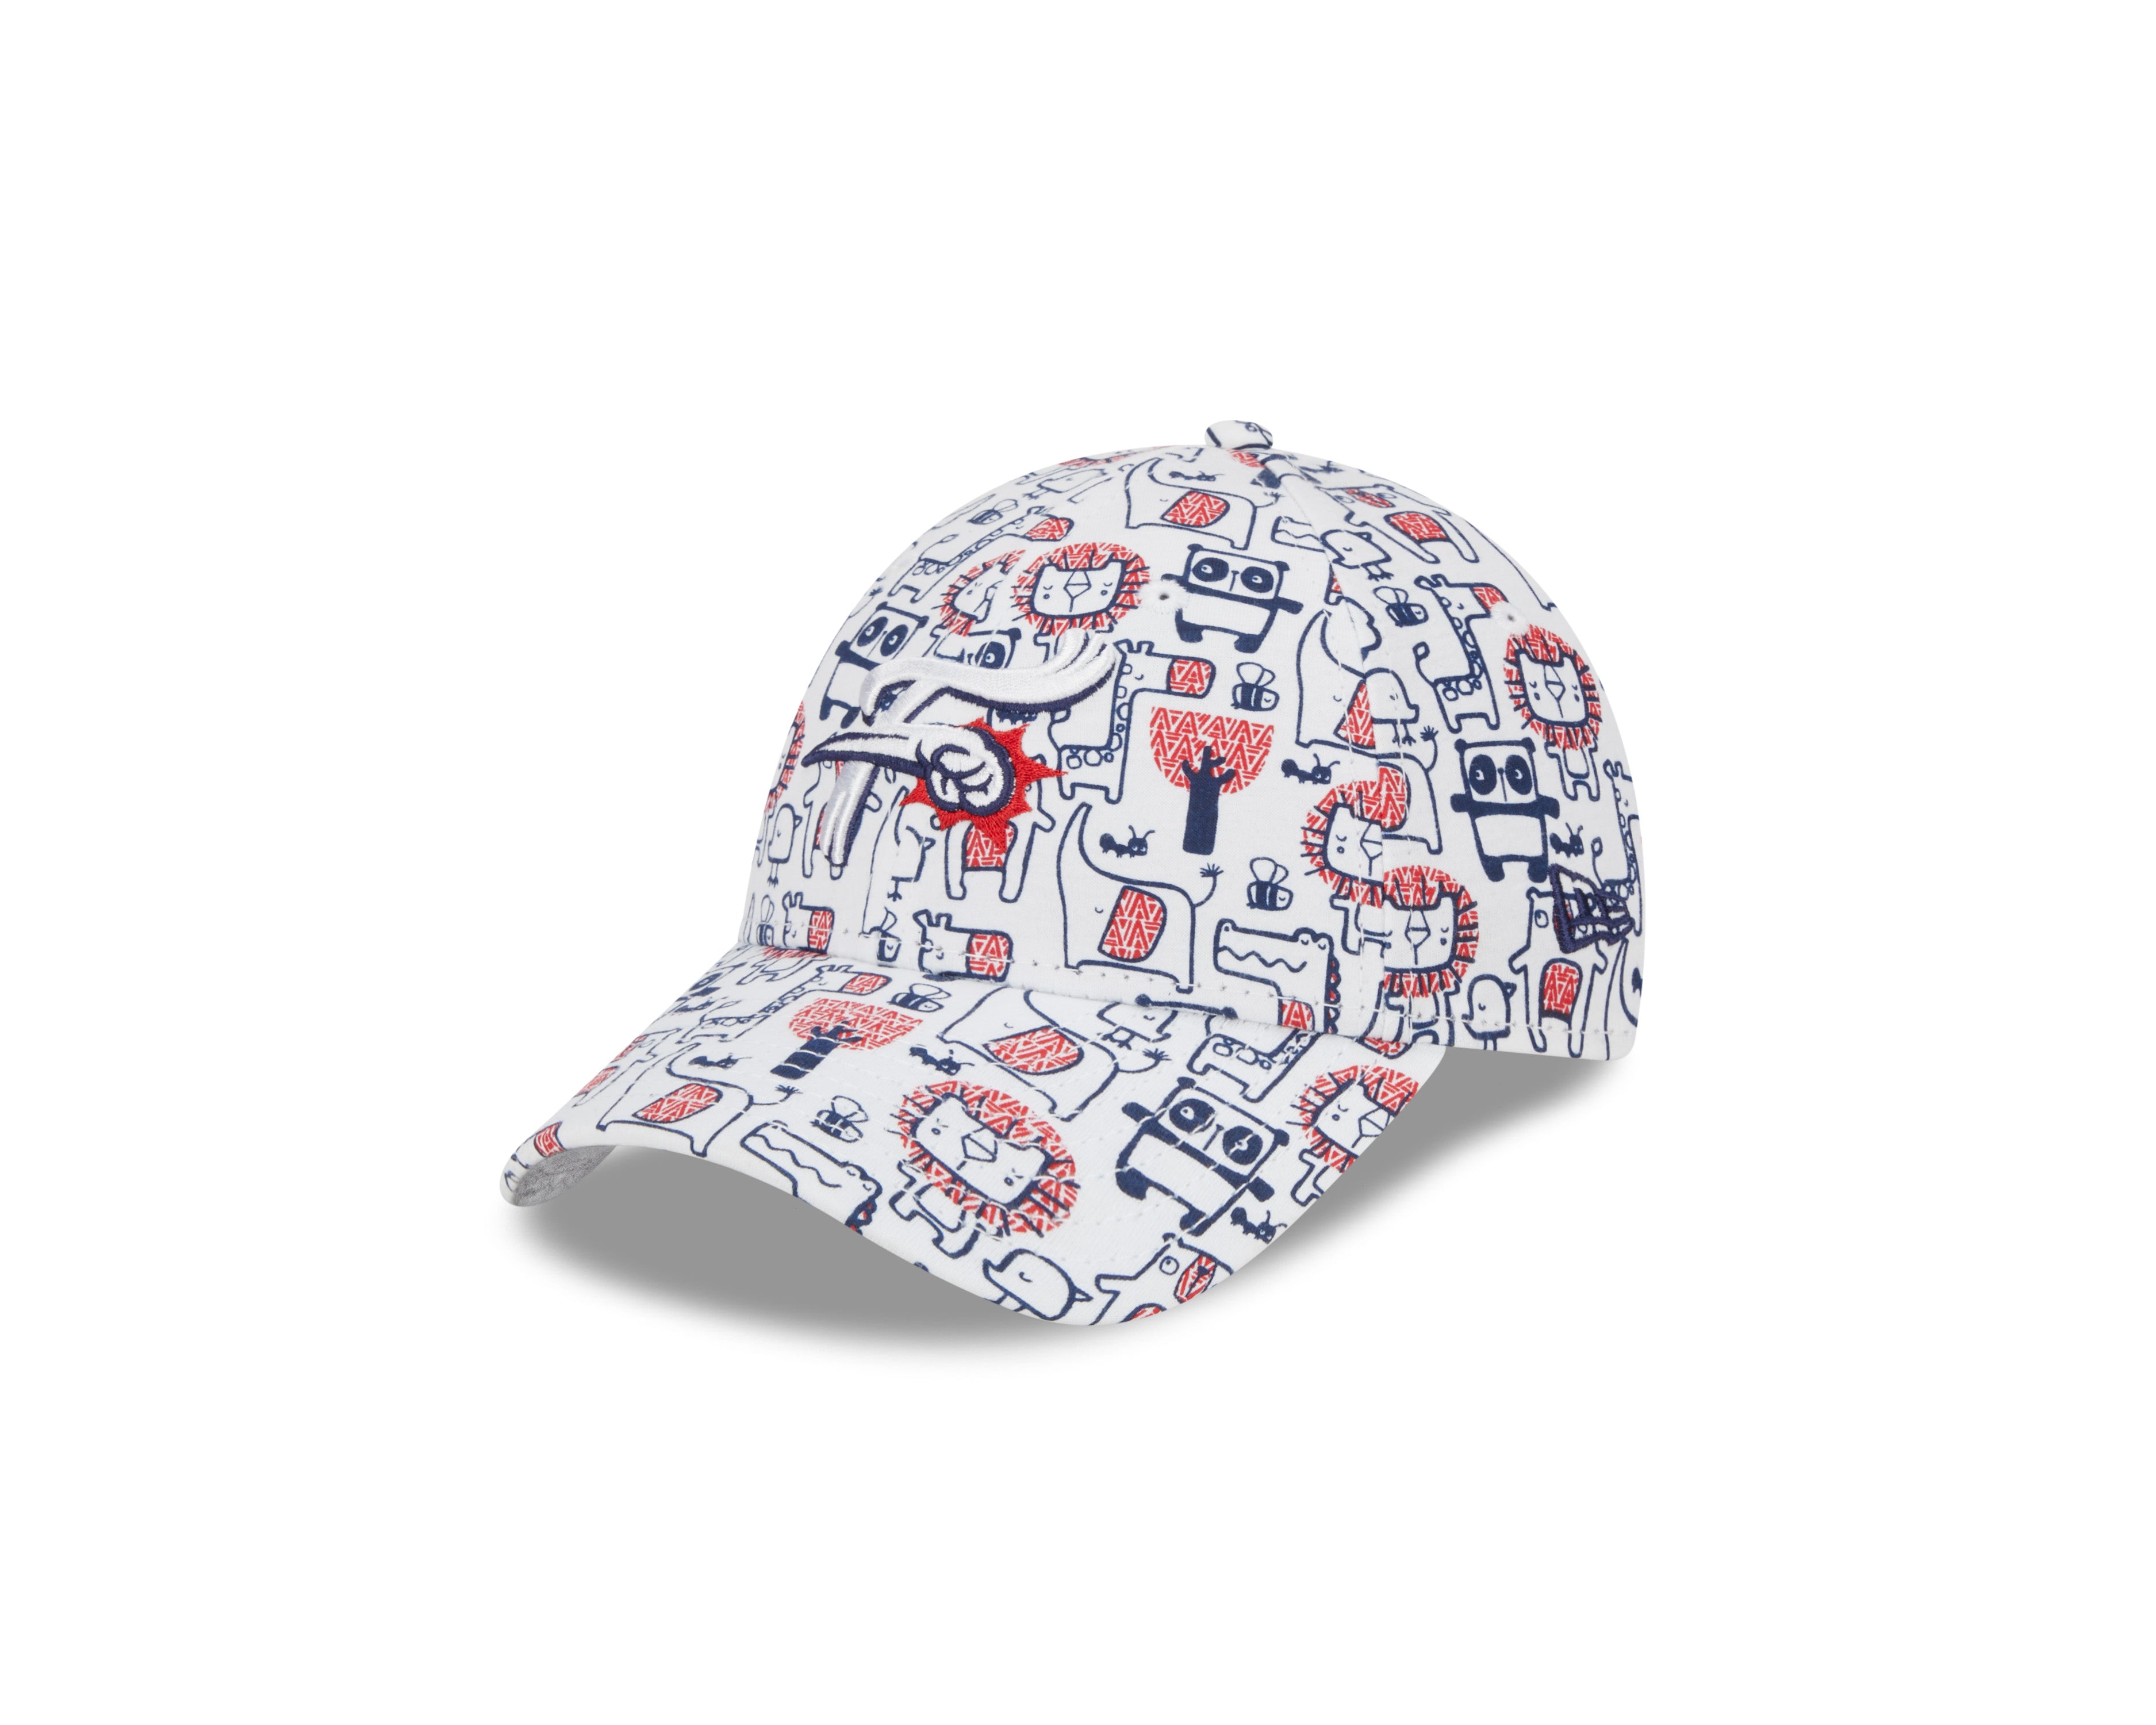 New Era Minor League 9Forty Phils Cap (red)